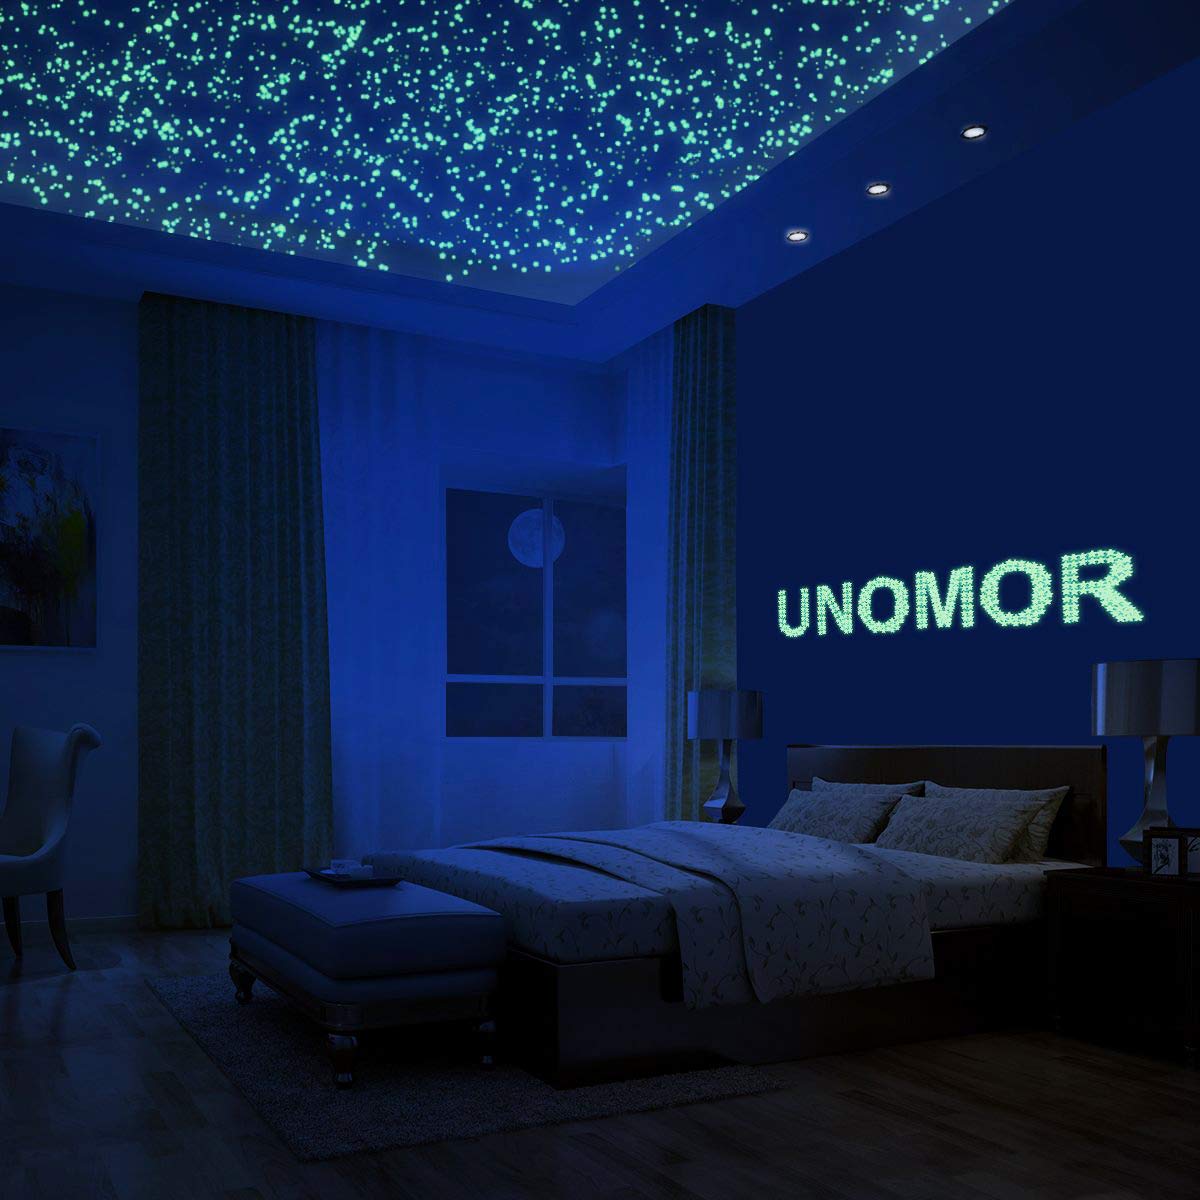 Glow in the Dark Star Ceiling, Extra Large Moon